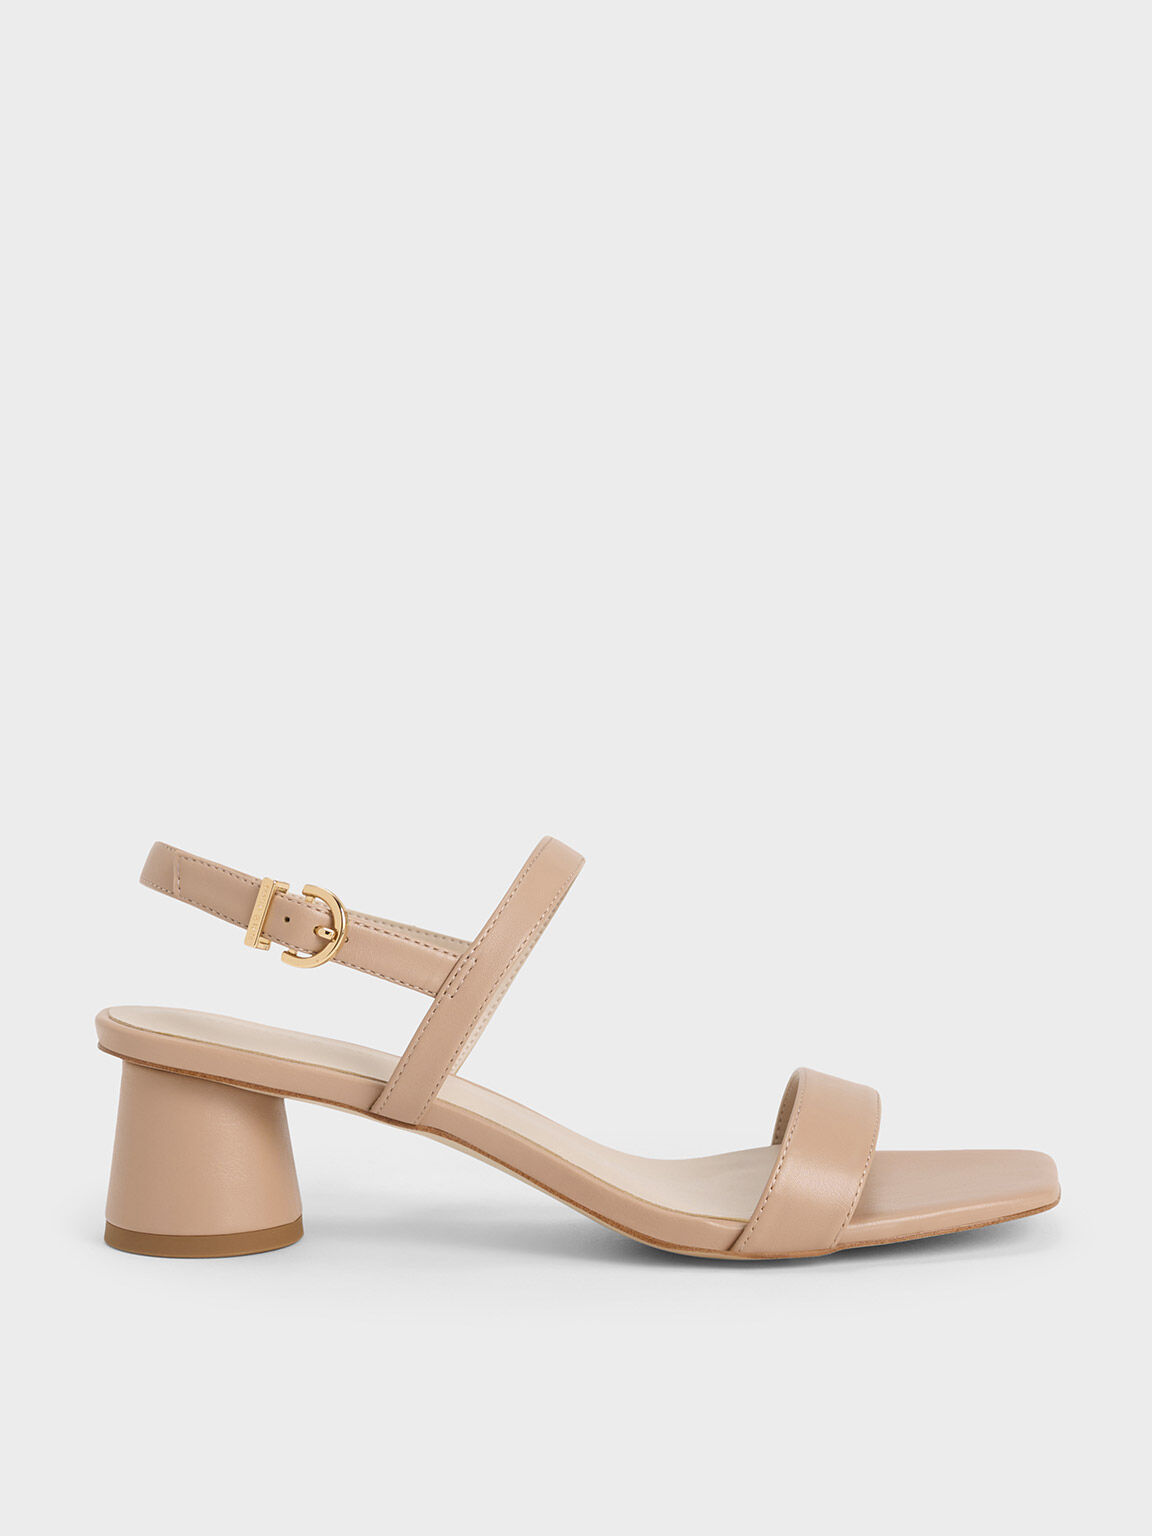 Nude Cylindrical Heel Back Strap Sandals - CHARLES & KEITH CO